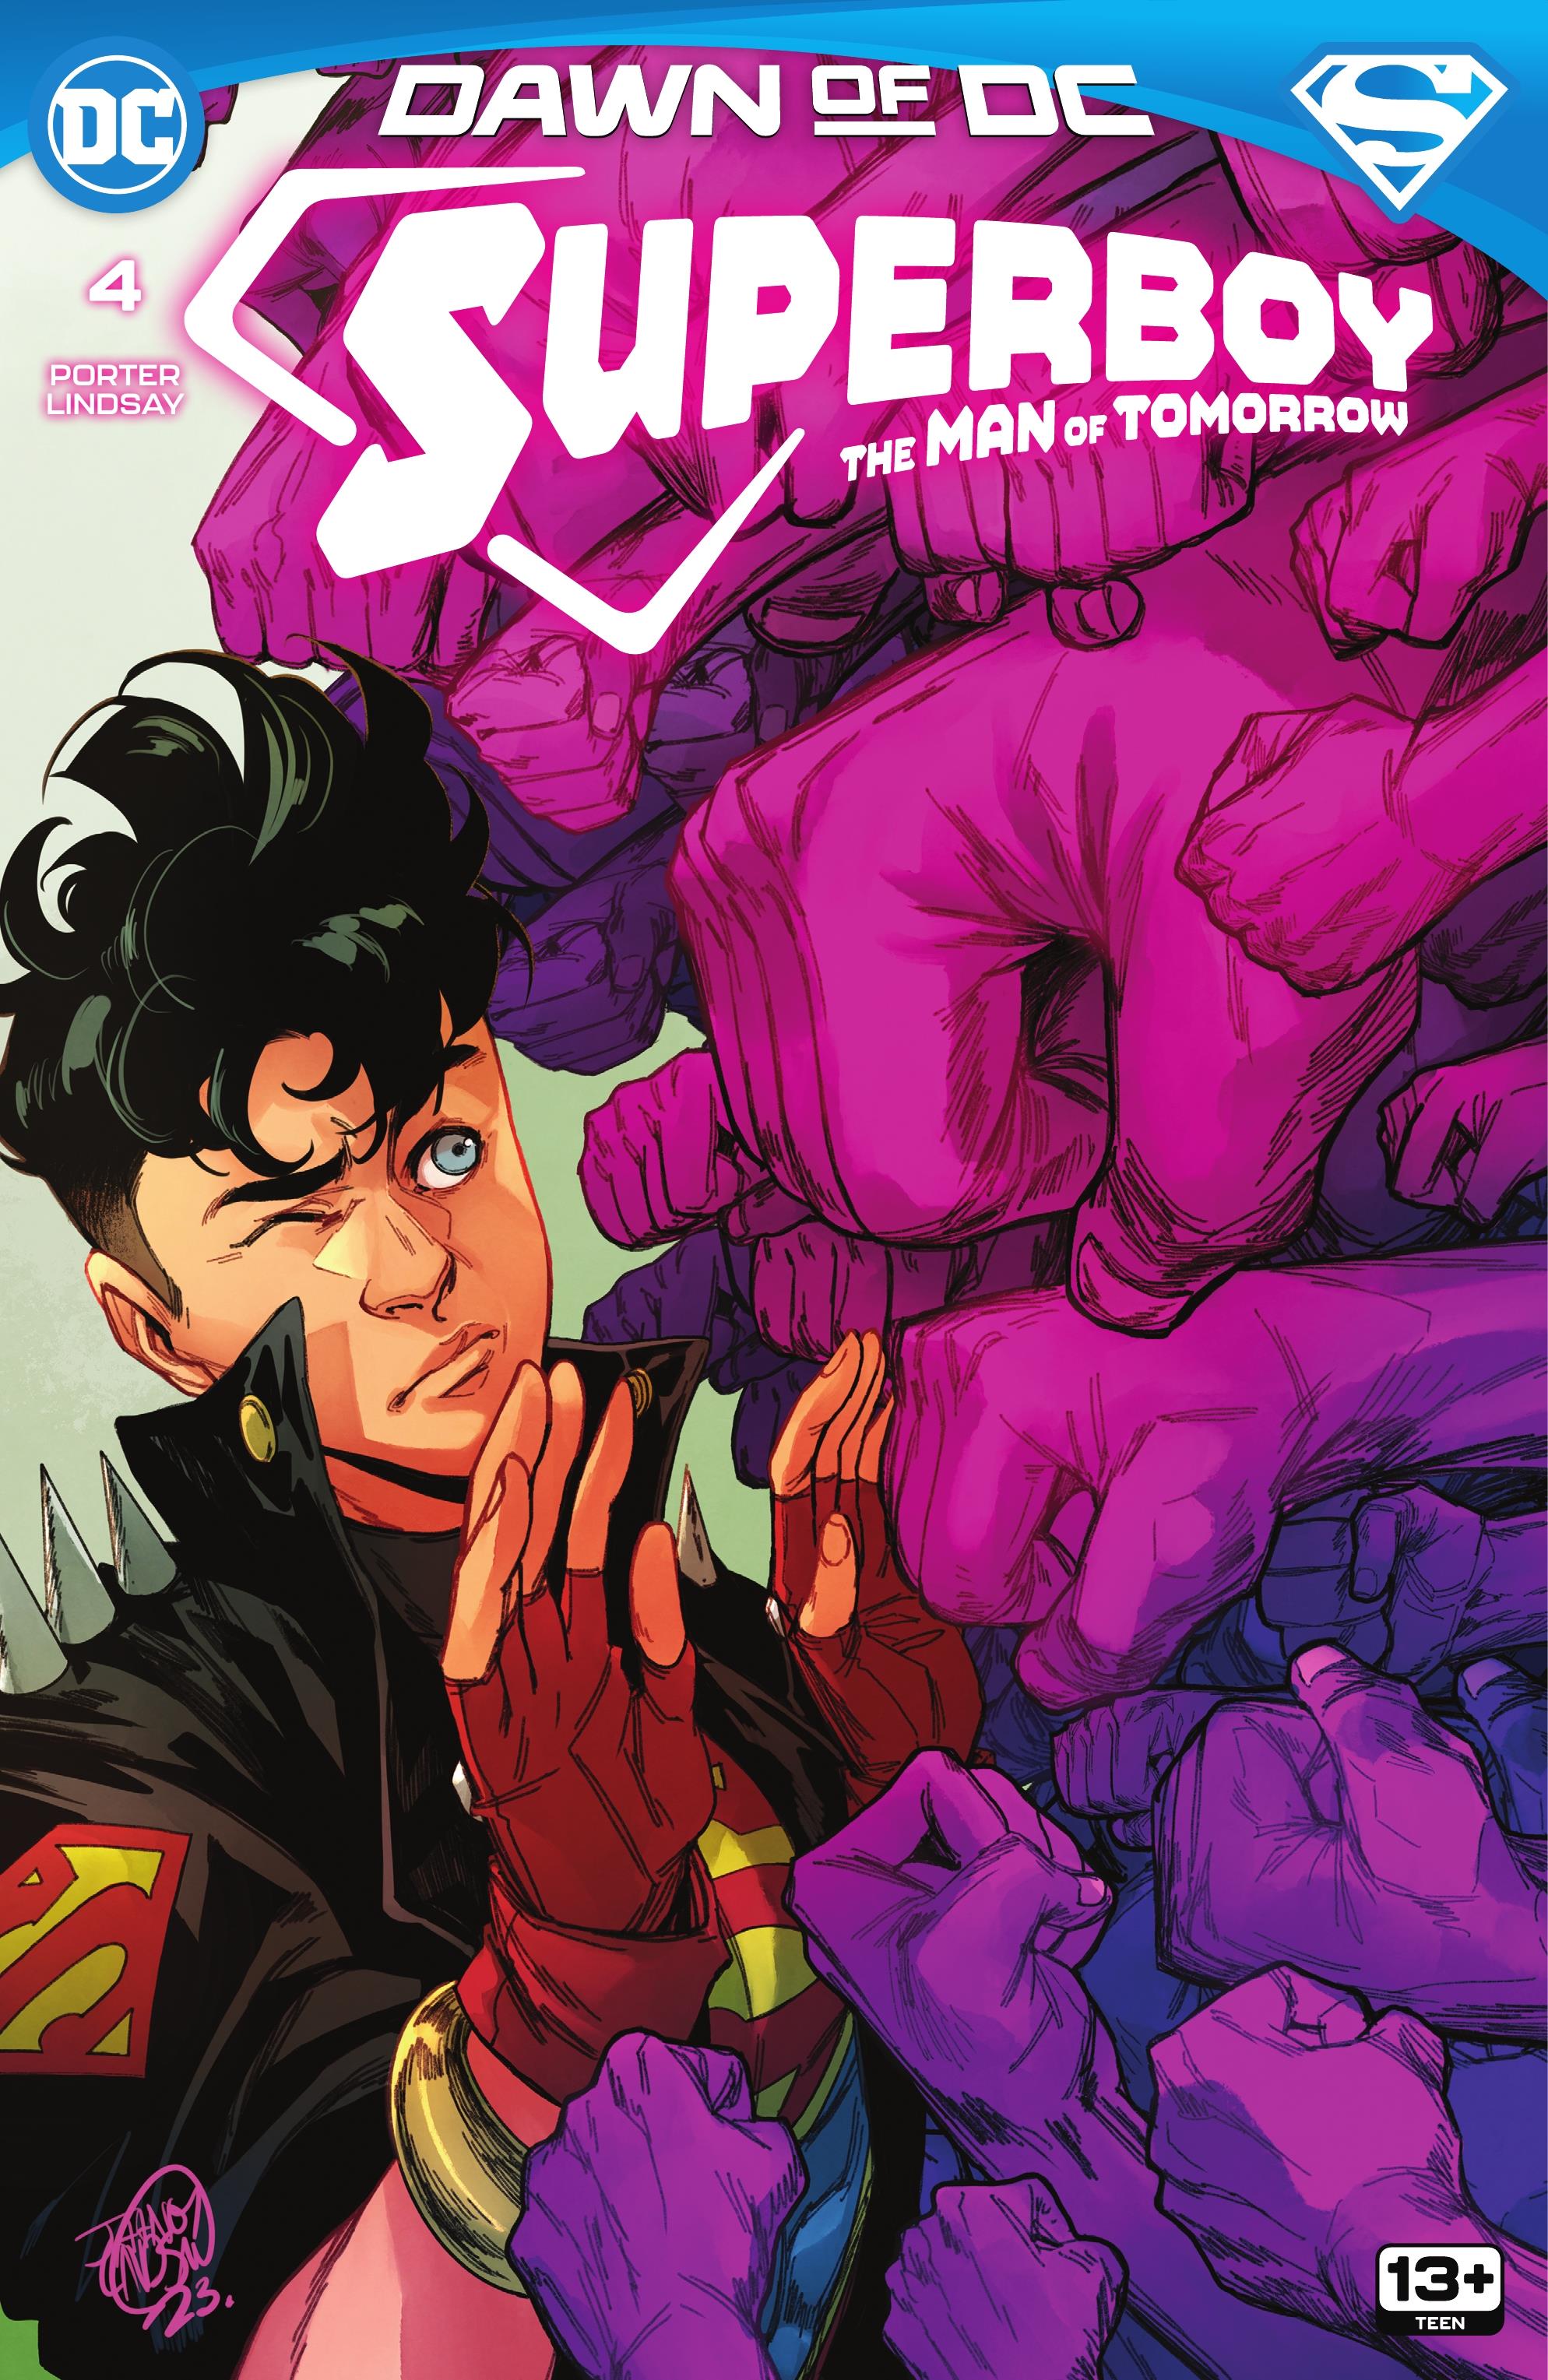 Weird Science DC Comics: Superboy: The Man of Tomorrow #4 Review